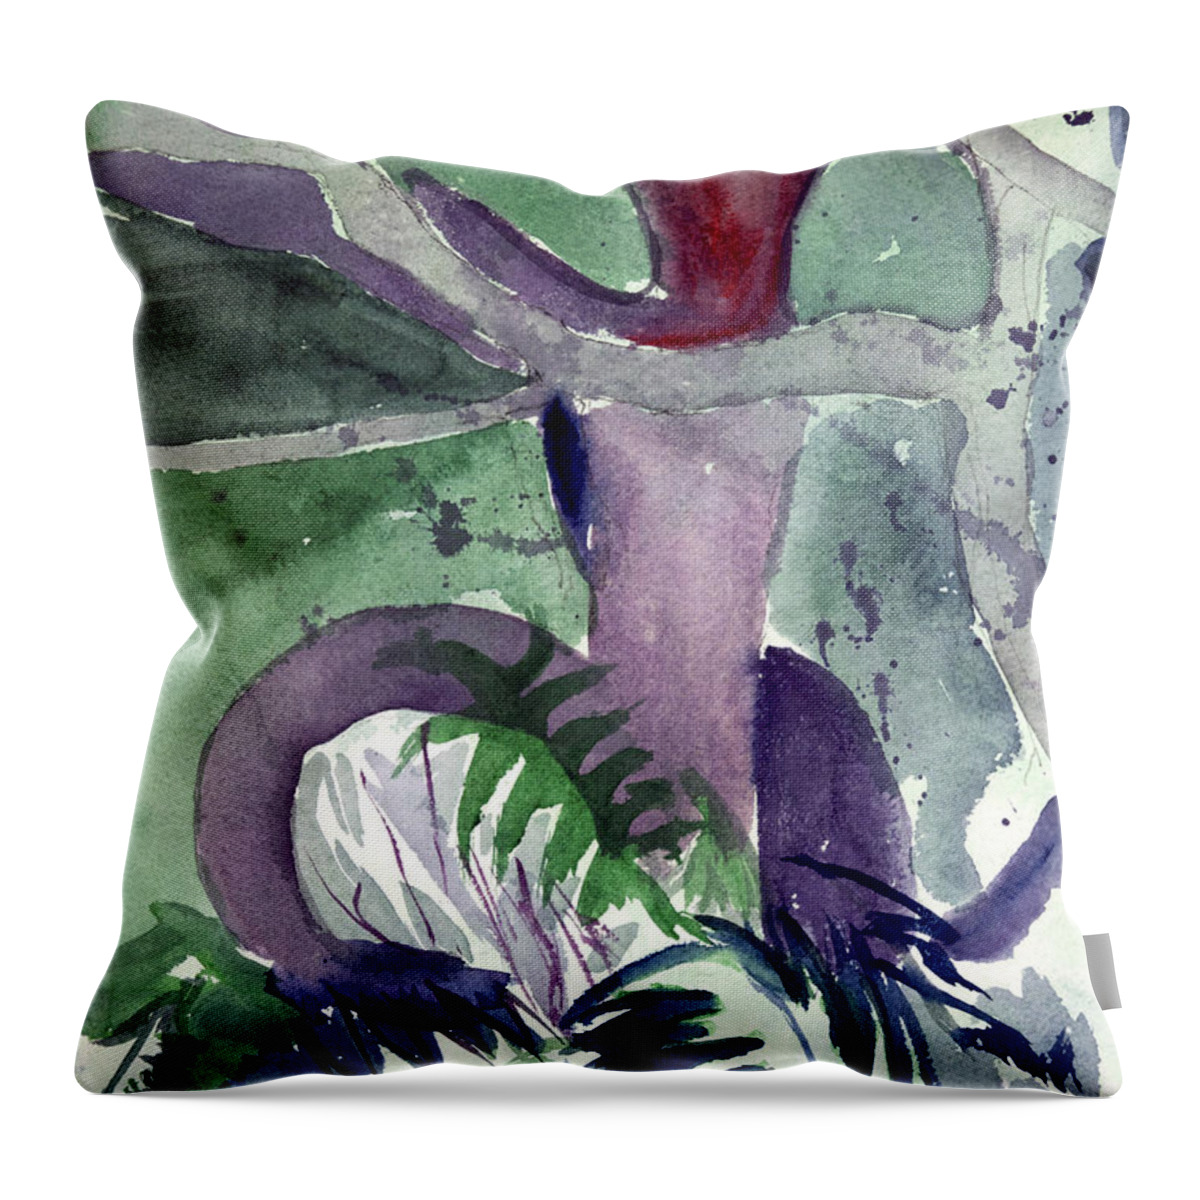  Throw Pillow featuring the painting Fern by Kathleen Barnes